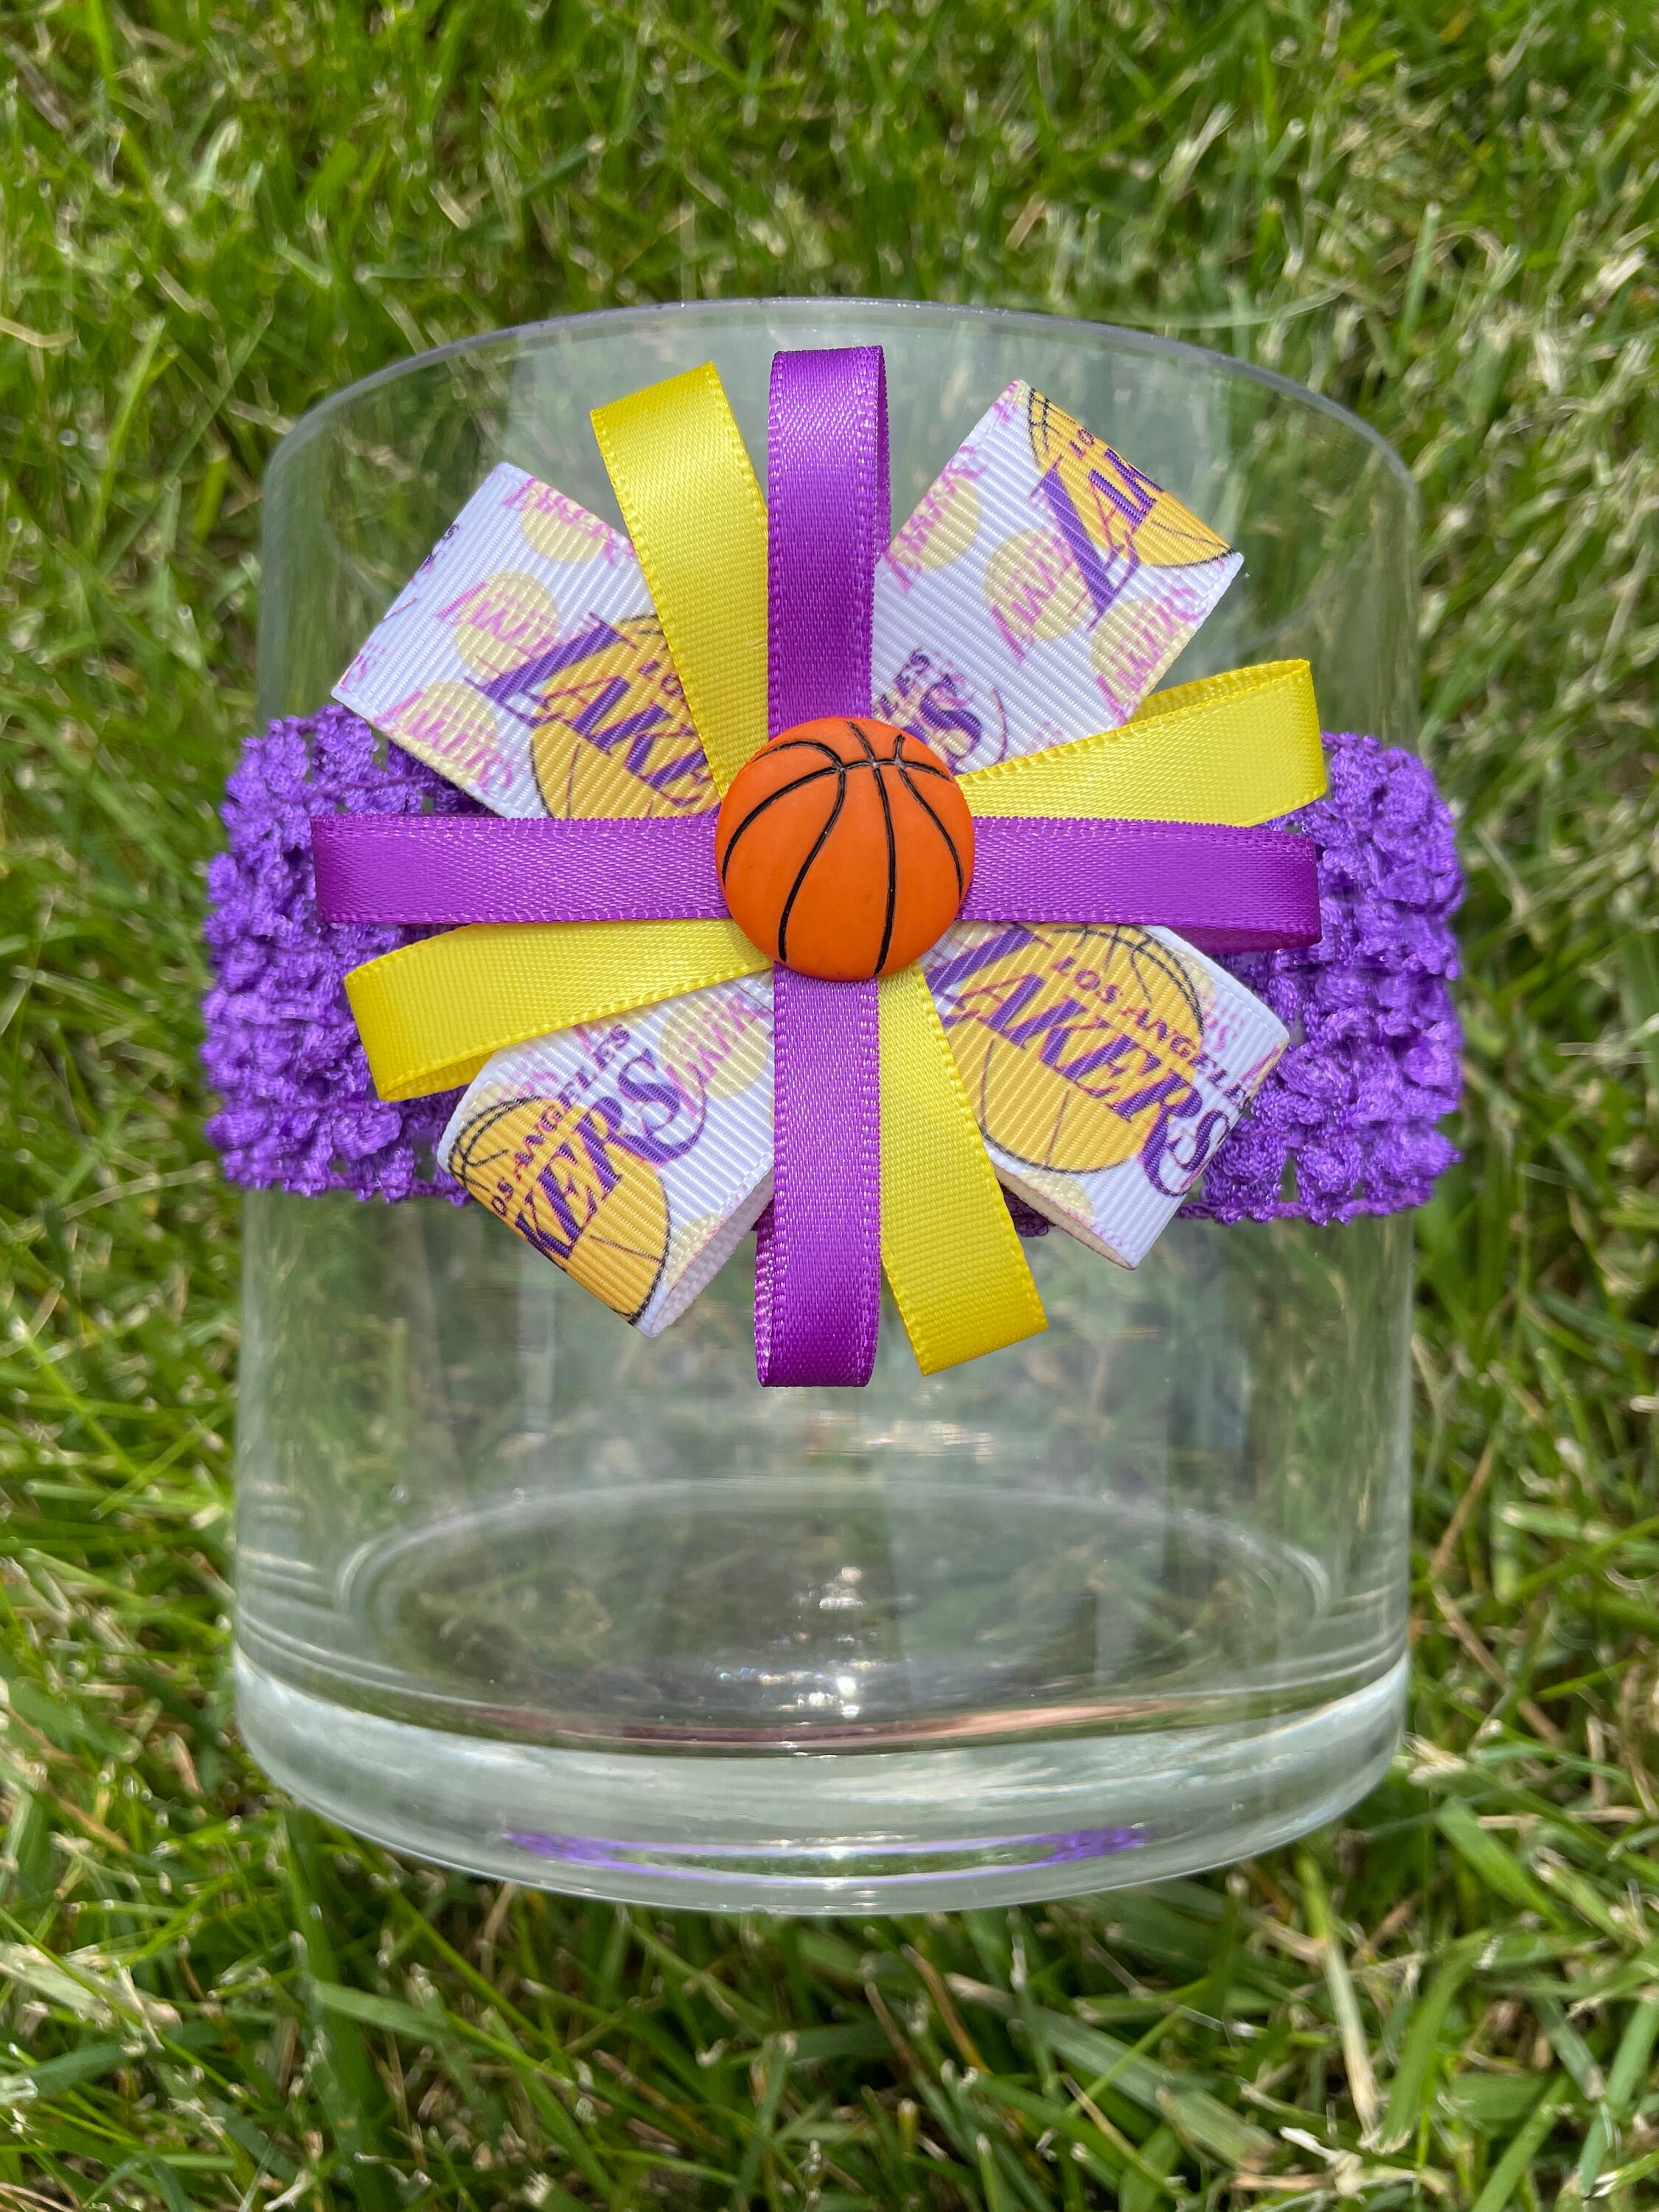 LA LAKERS Baby Shower Party Ideas, Photo 3 of 11